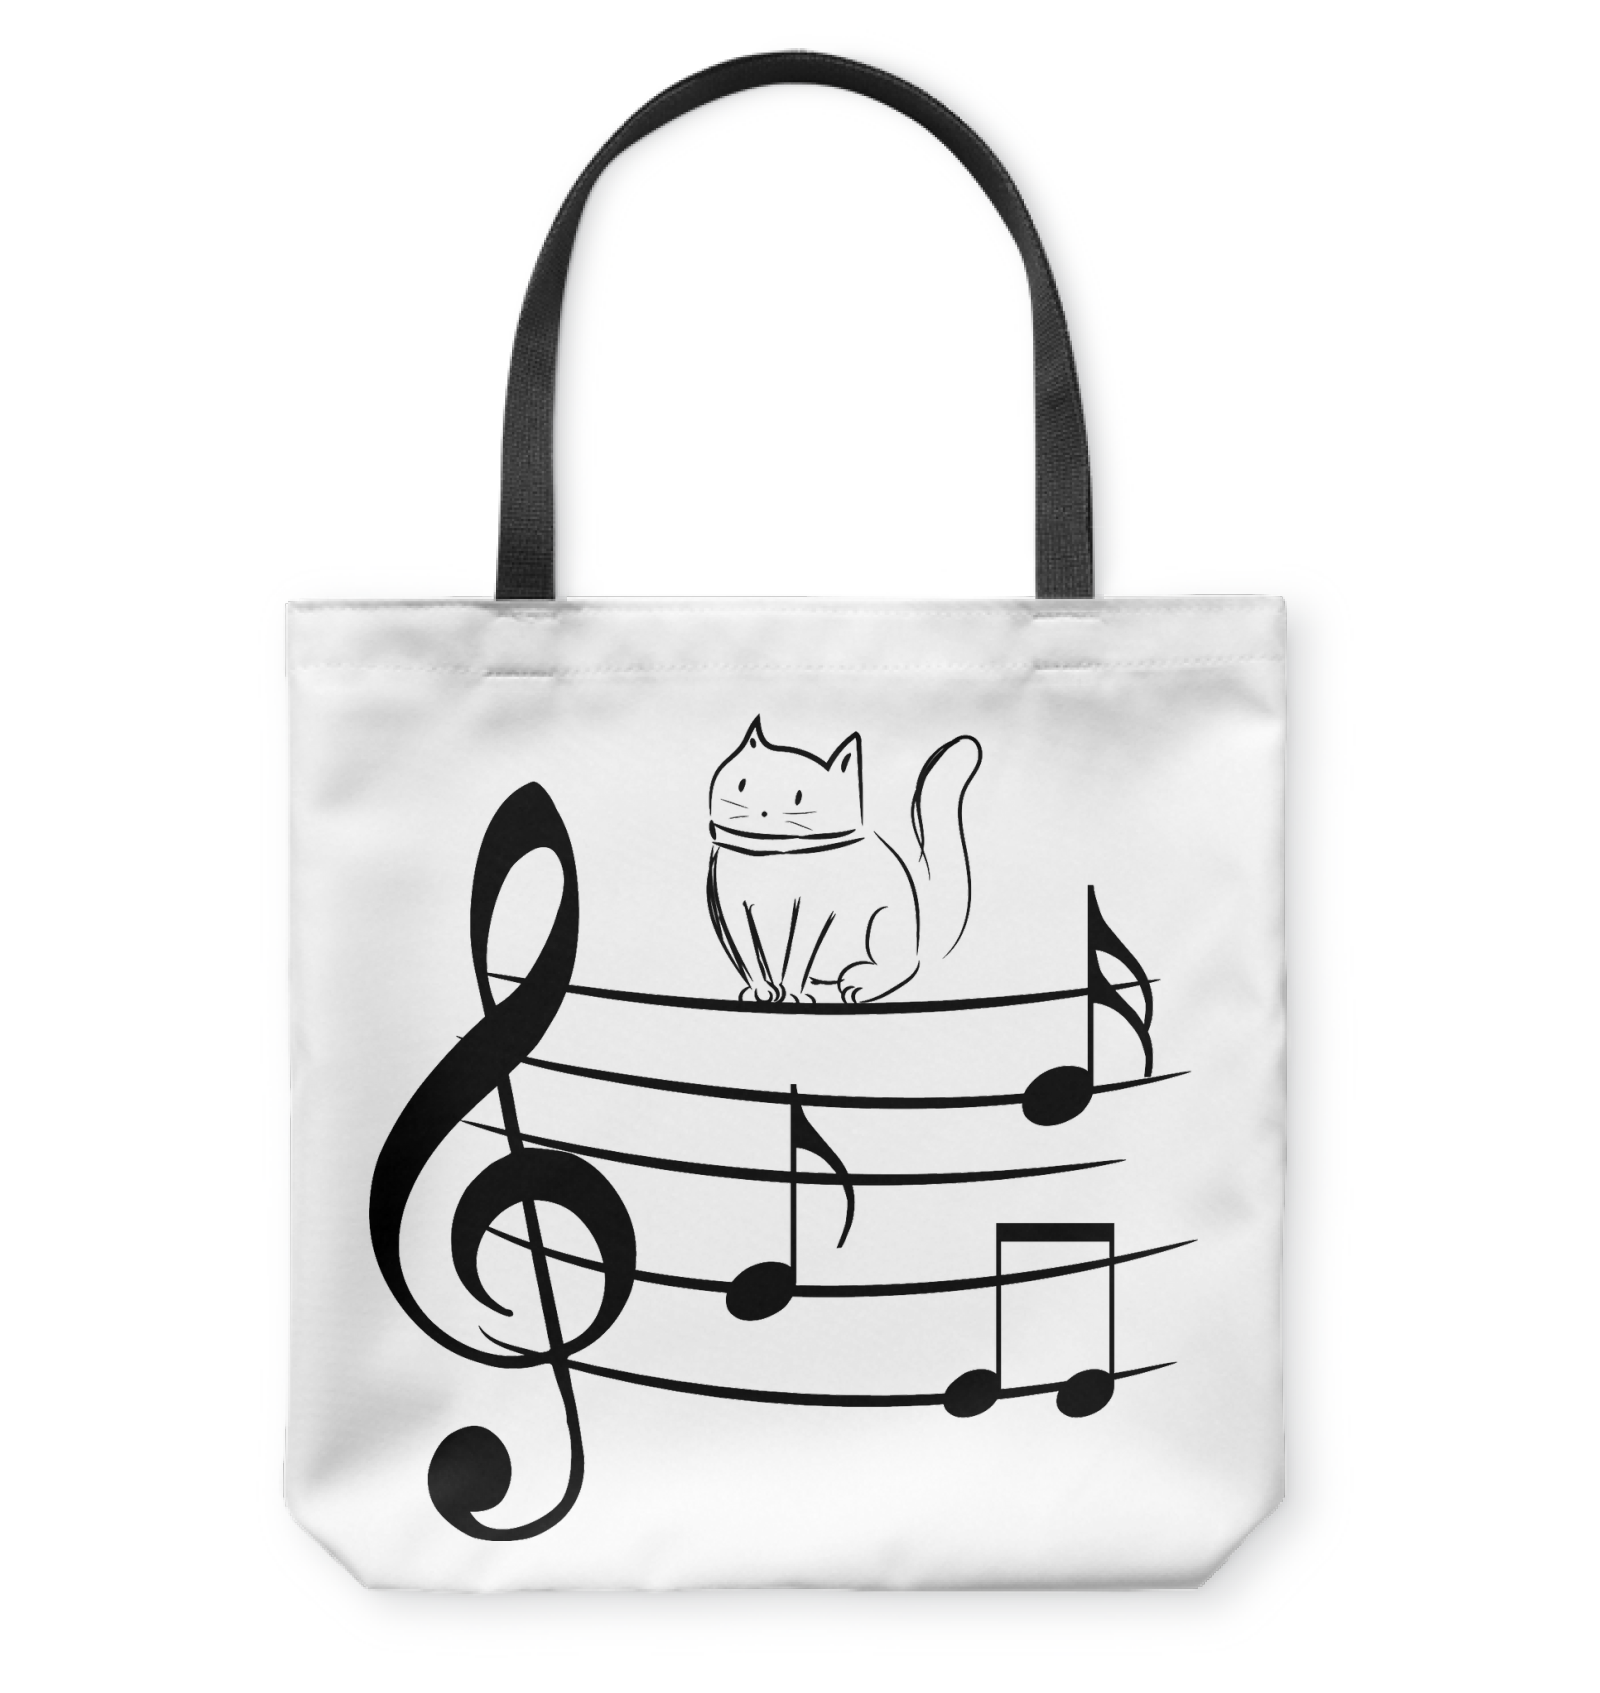 Kitty on a Staff - Basketweave Tote Bag